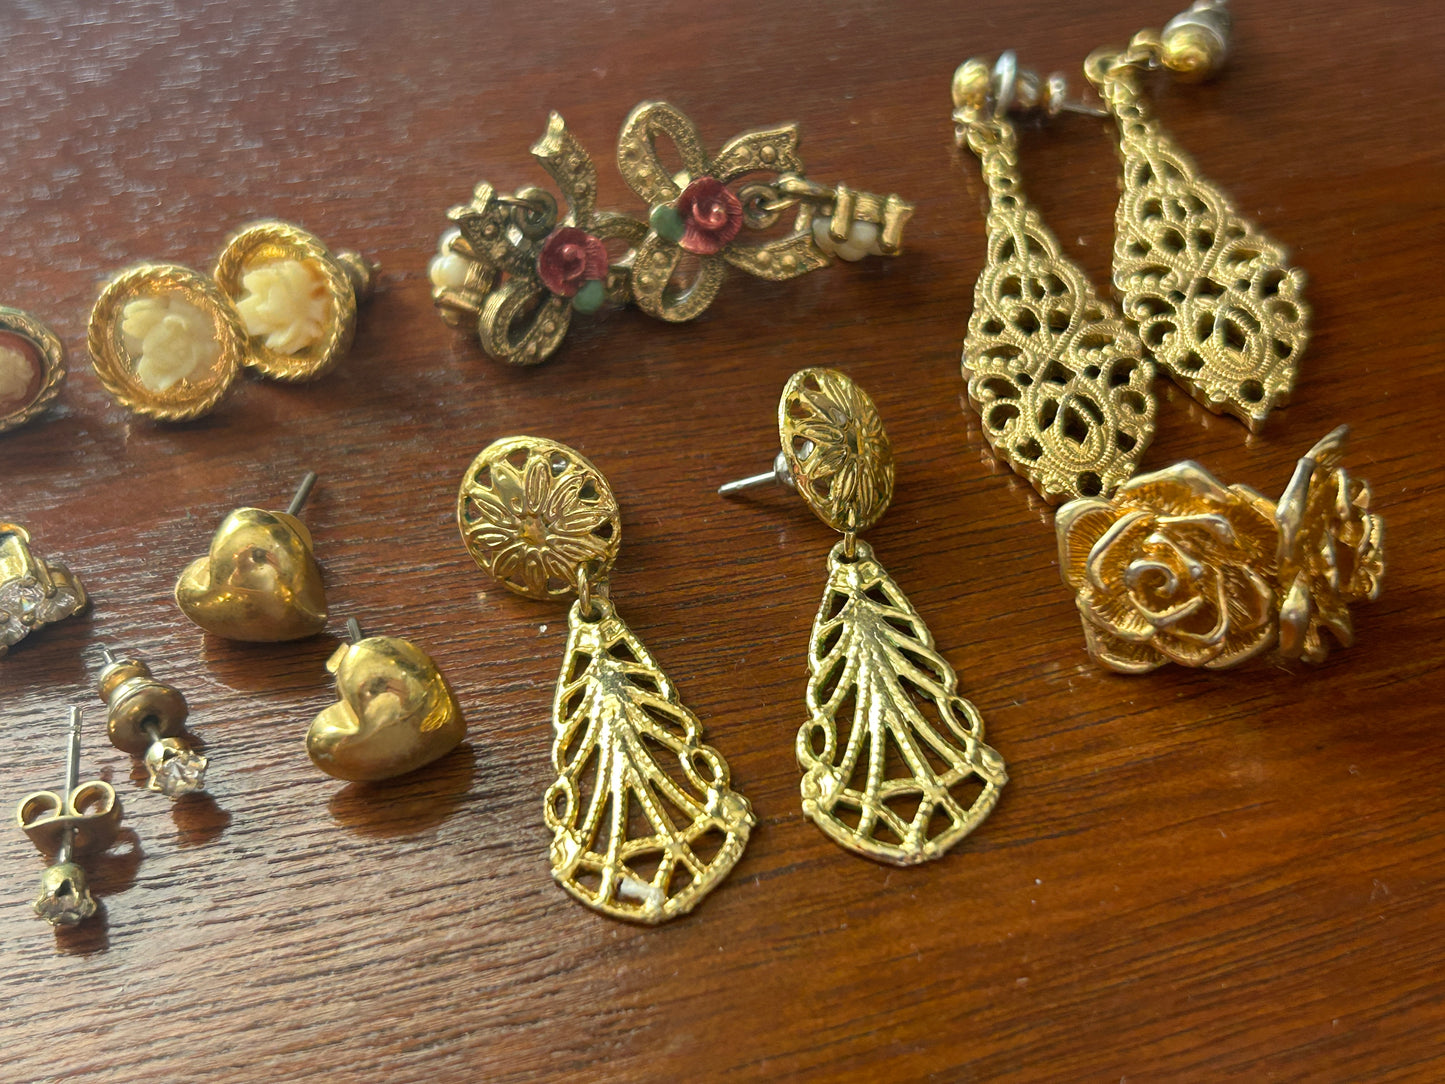 Vintage Victorian Style Pierced Earring Lot Carved Flowers Cameo Rose